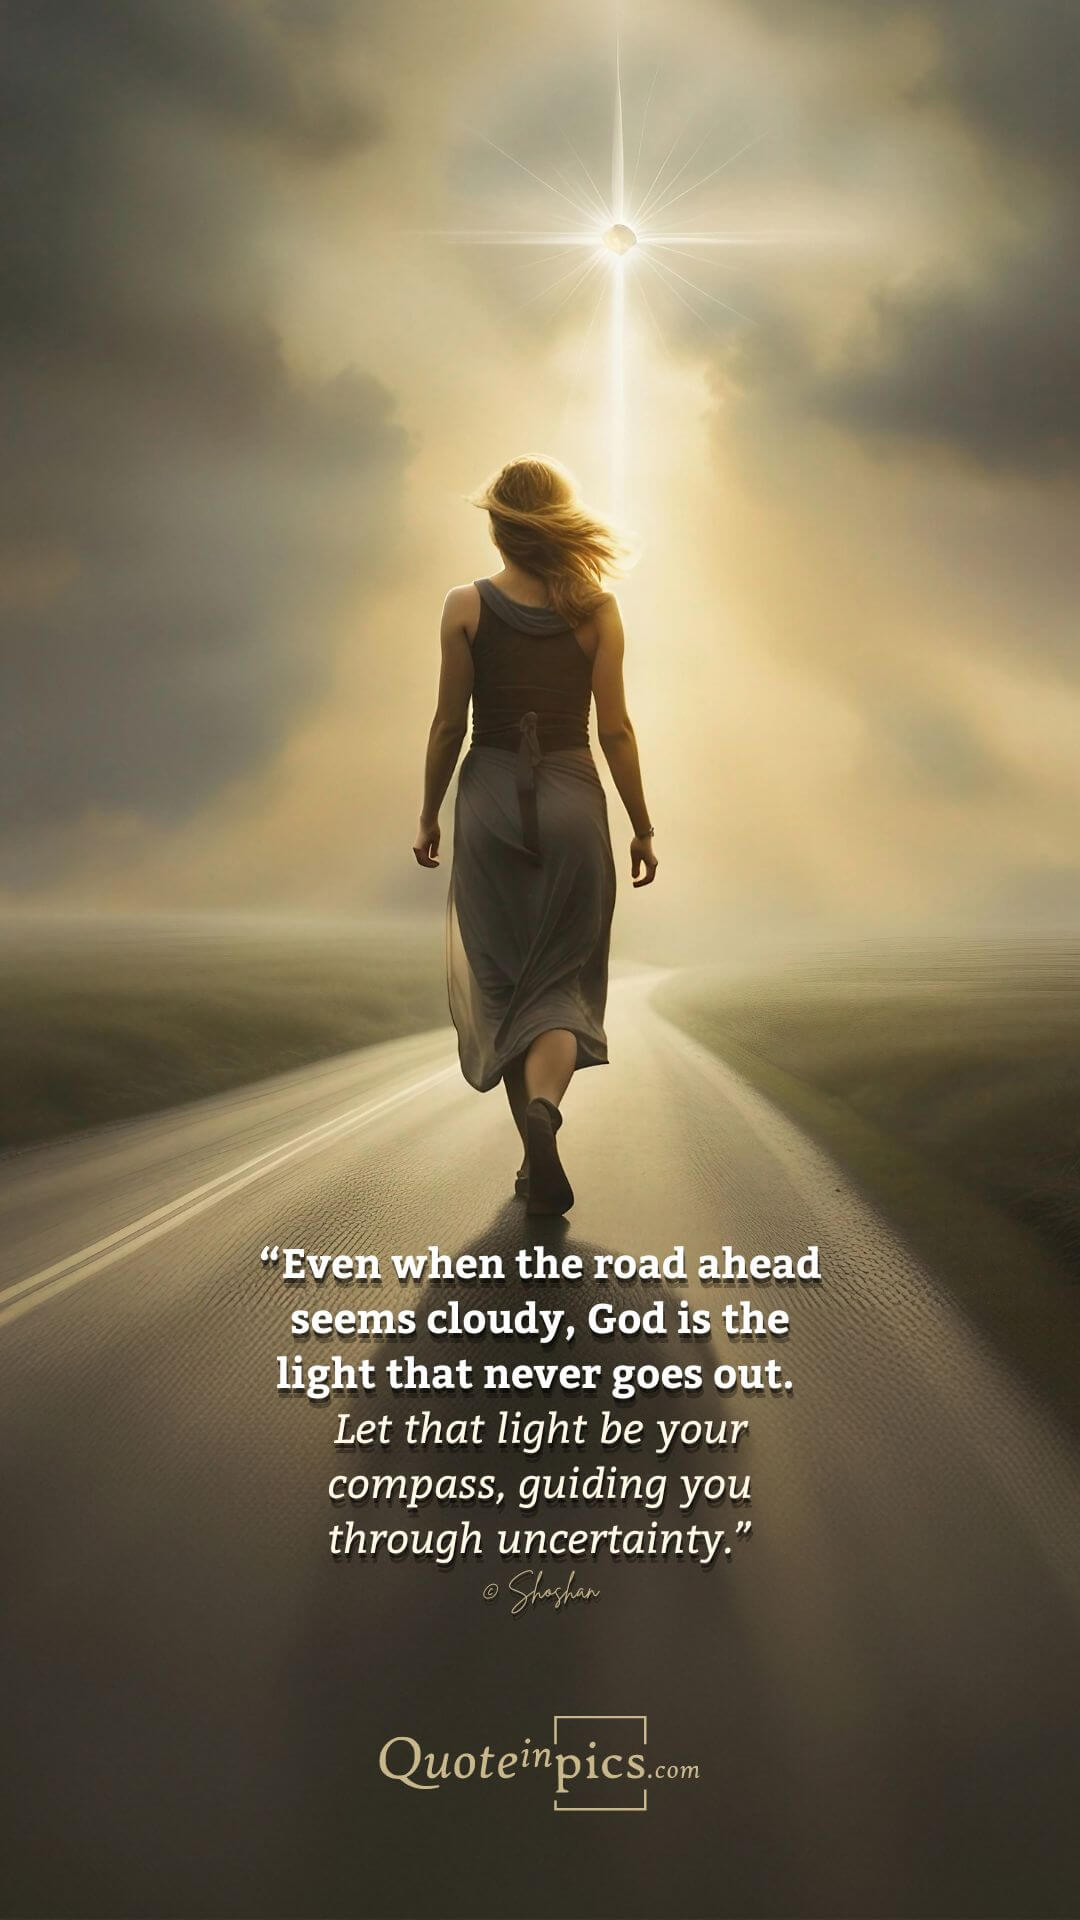 Even when the road ahead seems cloudy, God is the light that never goes out.